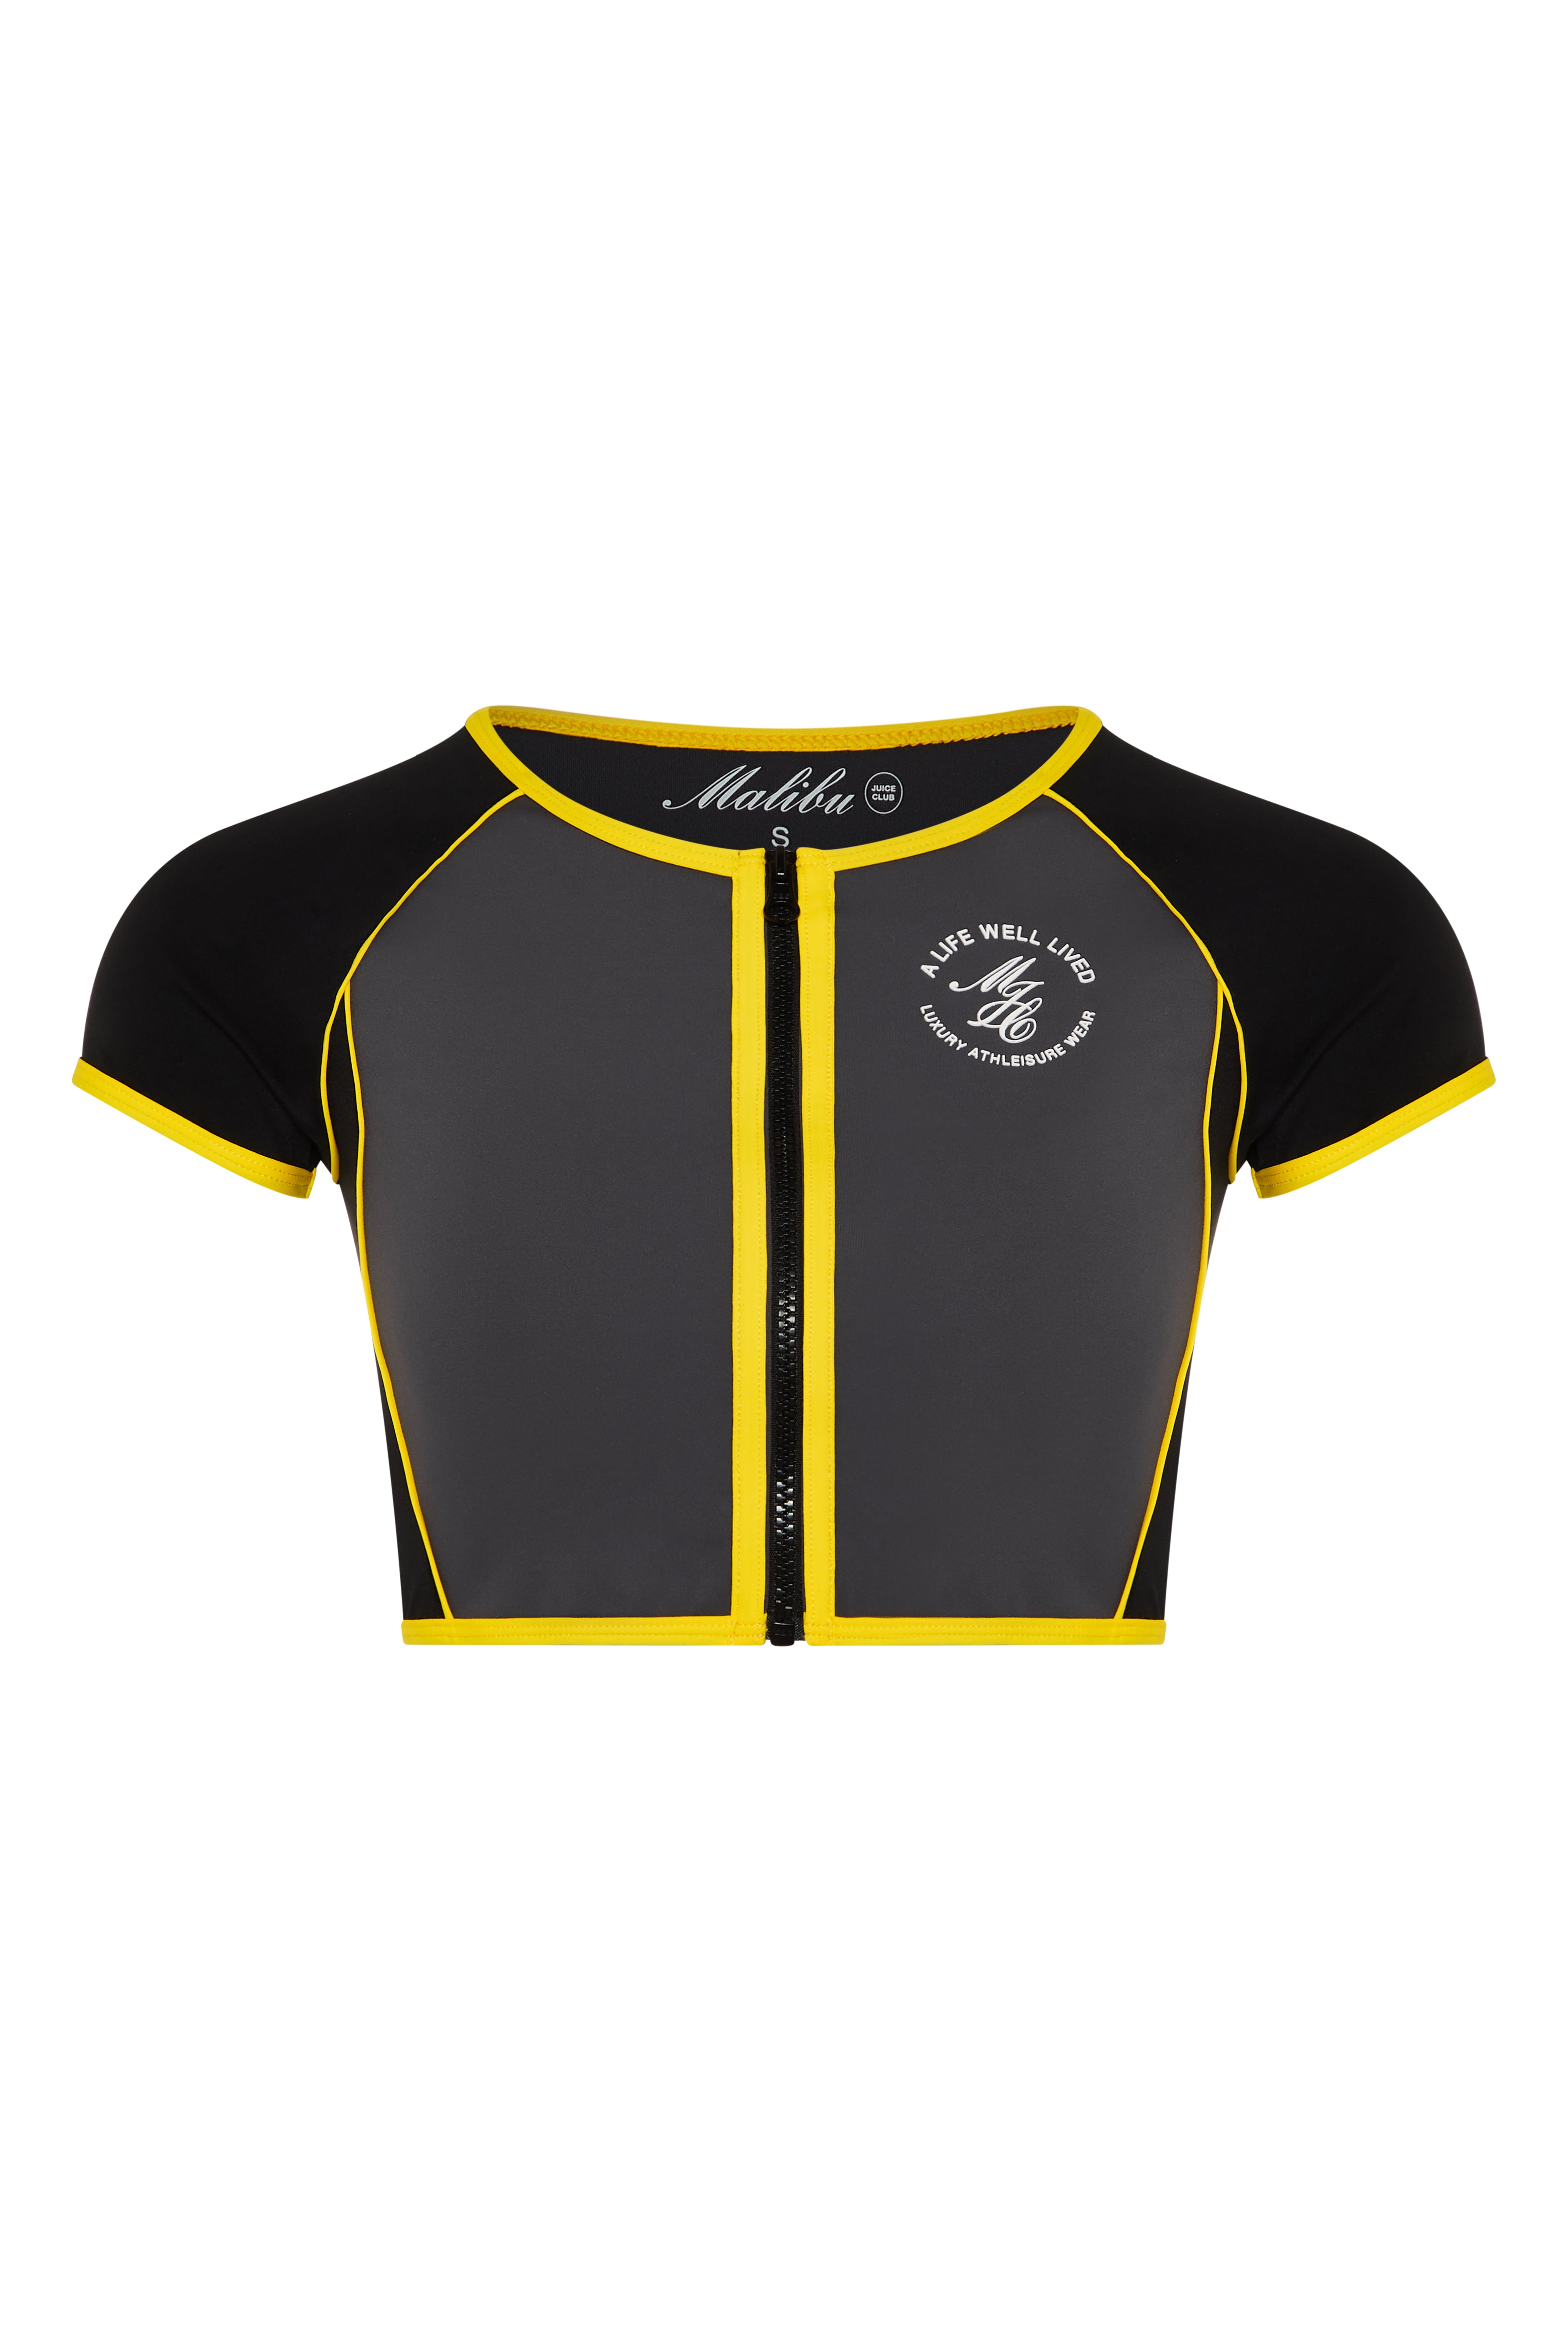 Solstice Canyon Cycling Top